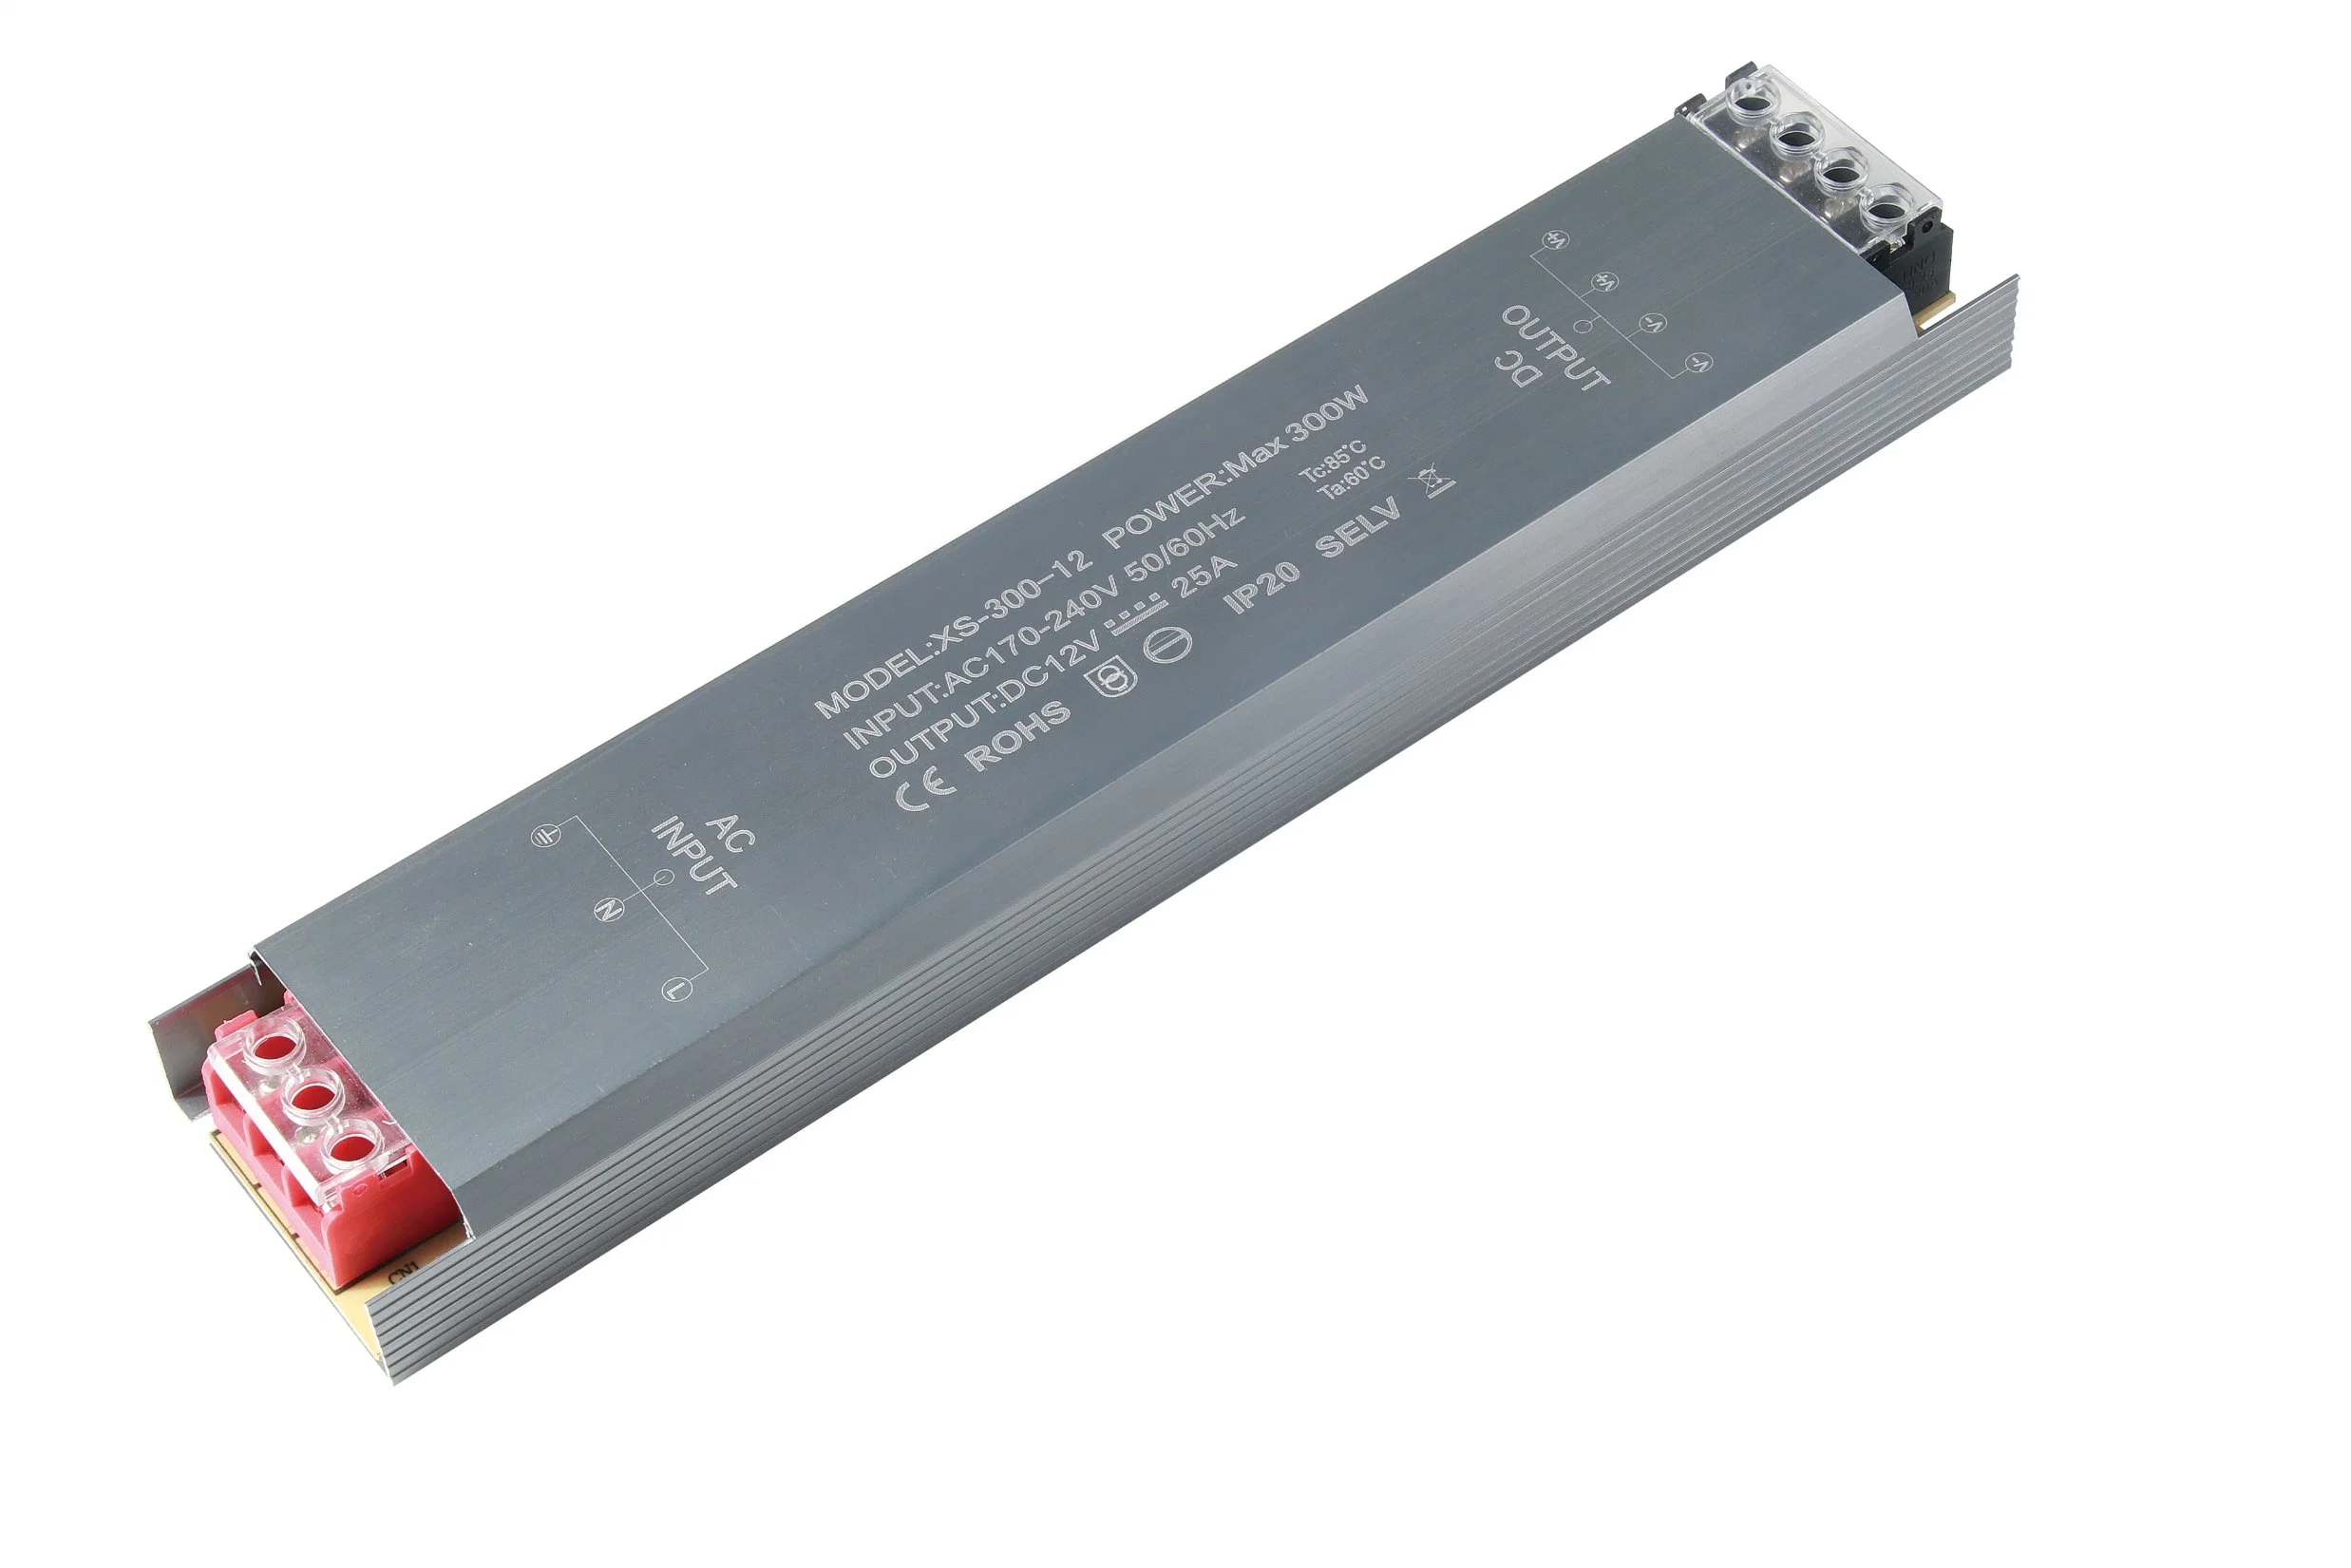 LED Power Supply, Output 24VDC 100W Max LED Driver, Adaptor